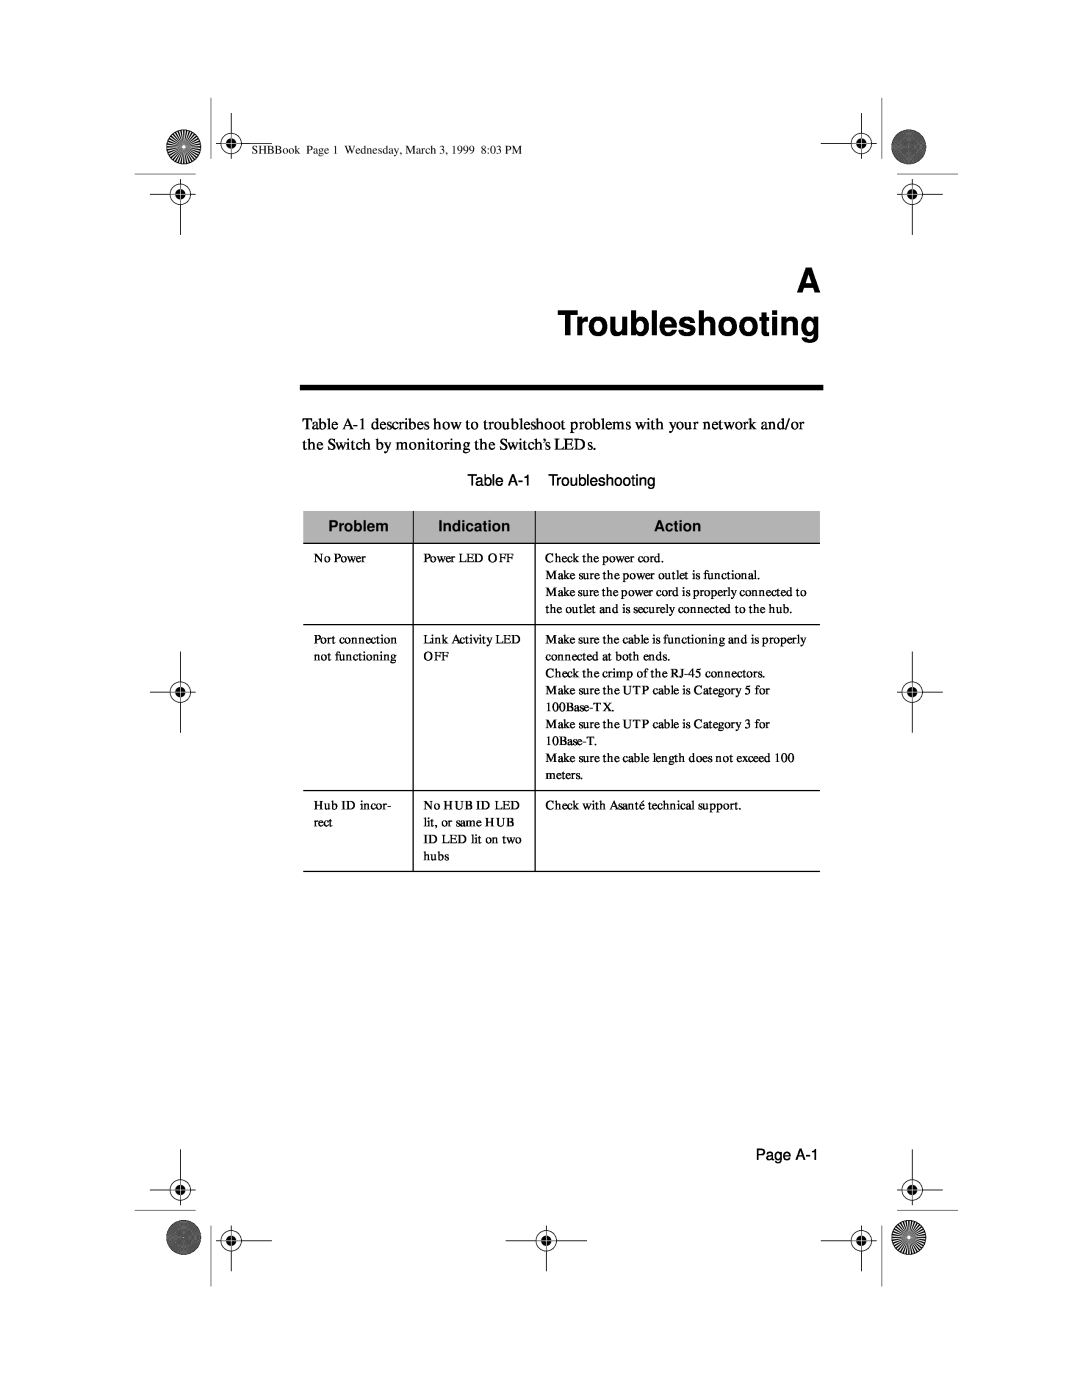 Asante Technologies II user manual A Troubleshooting, Table A-1 Troubleshooting, Problem, Indication, Action, Page A-1 